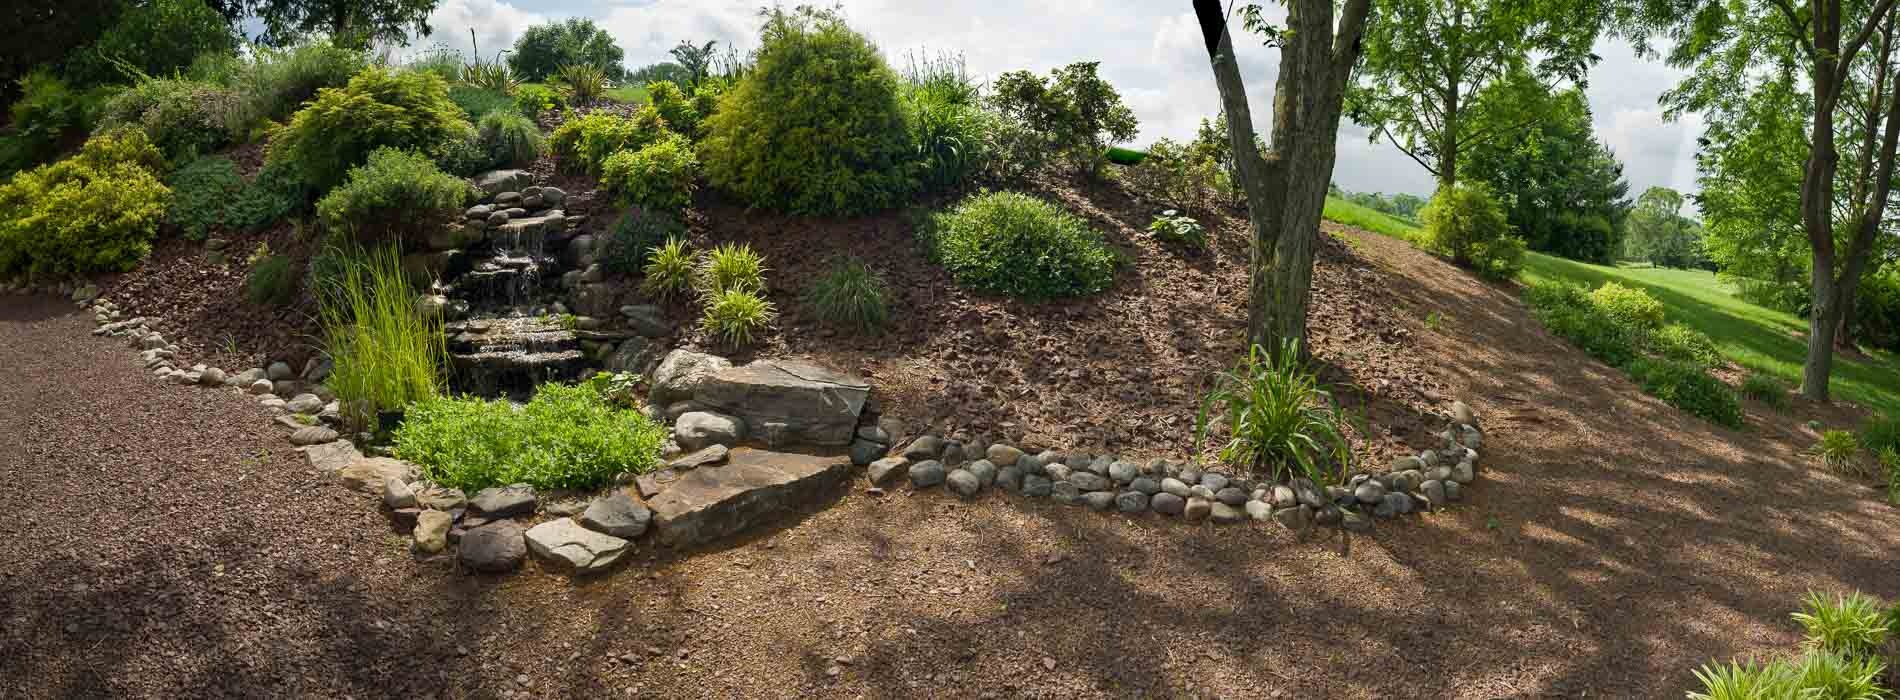 A garden with rocks and plants on the ground.